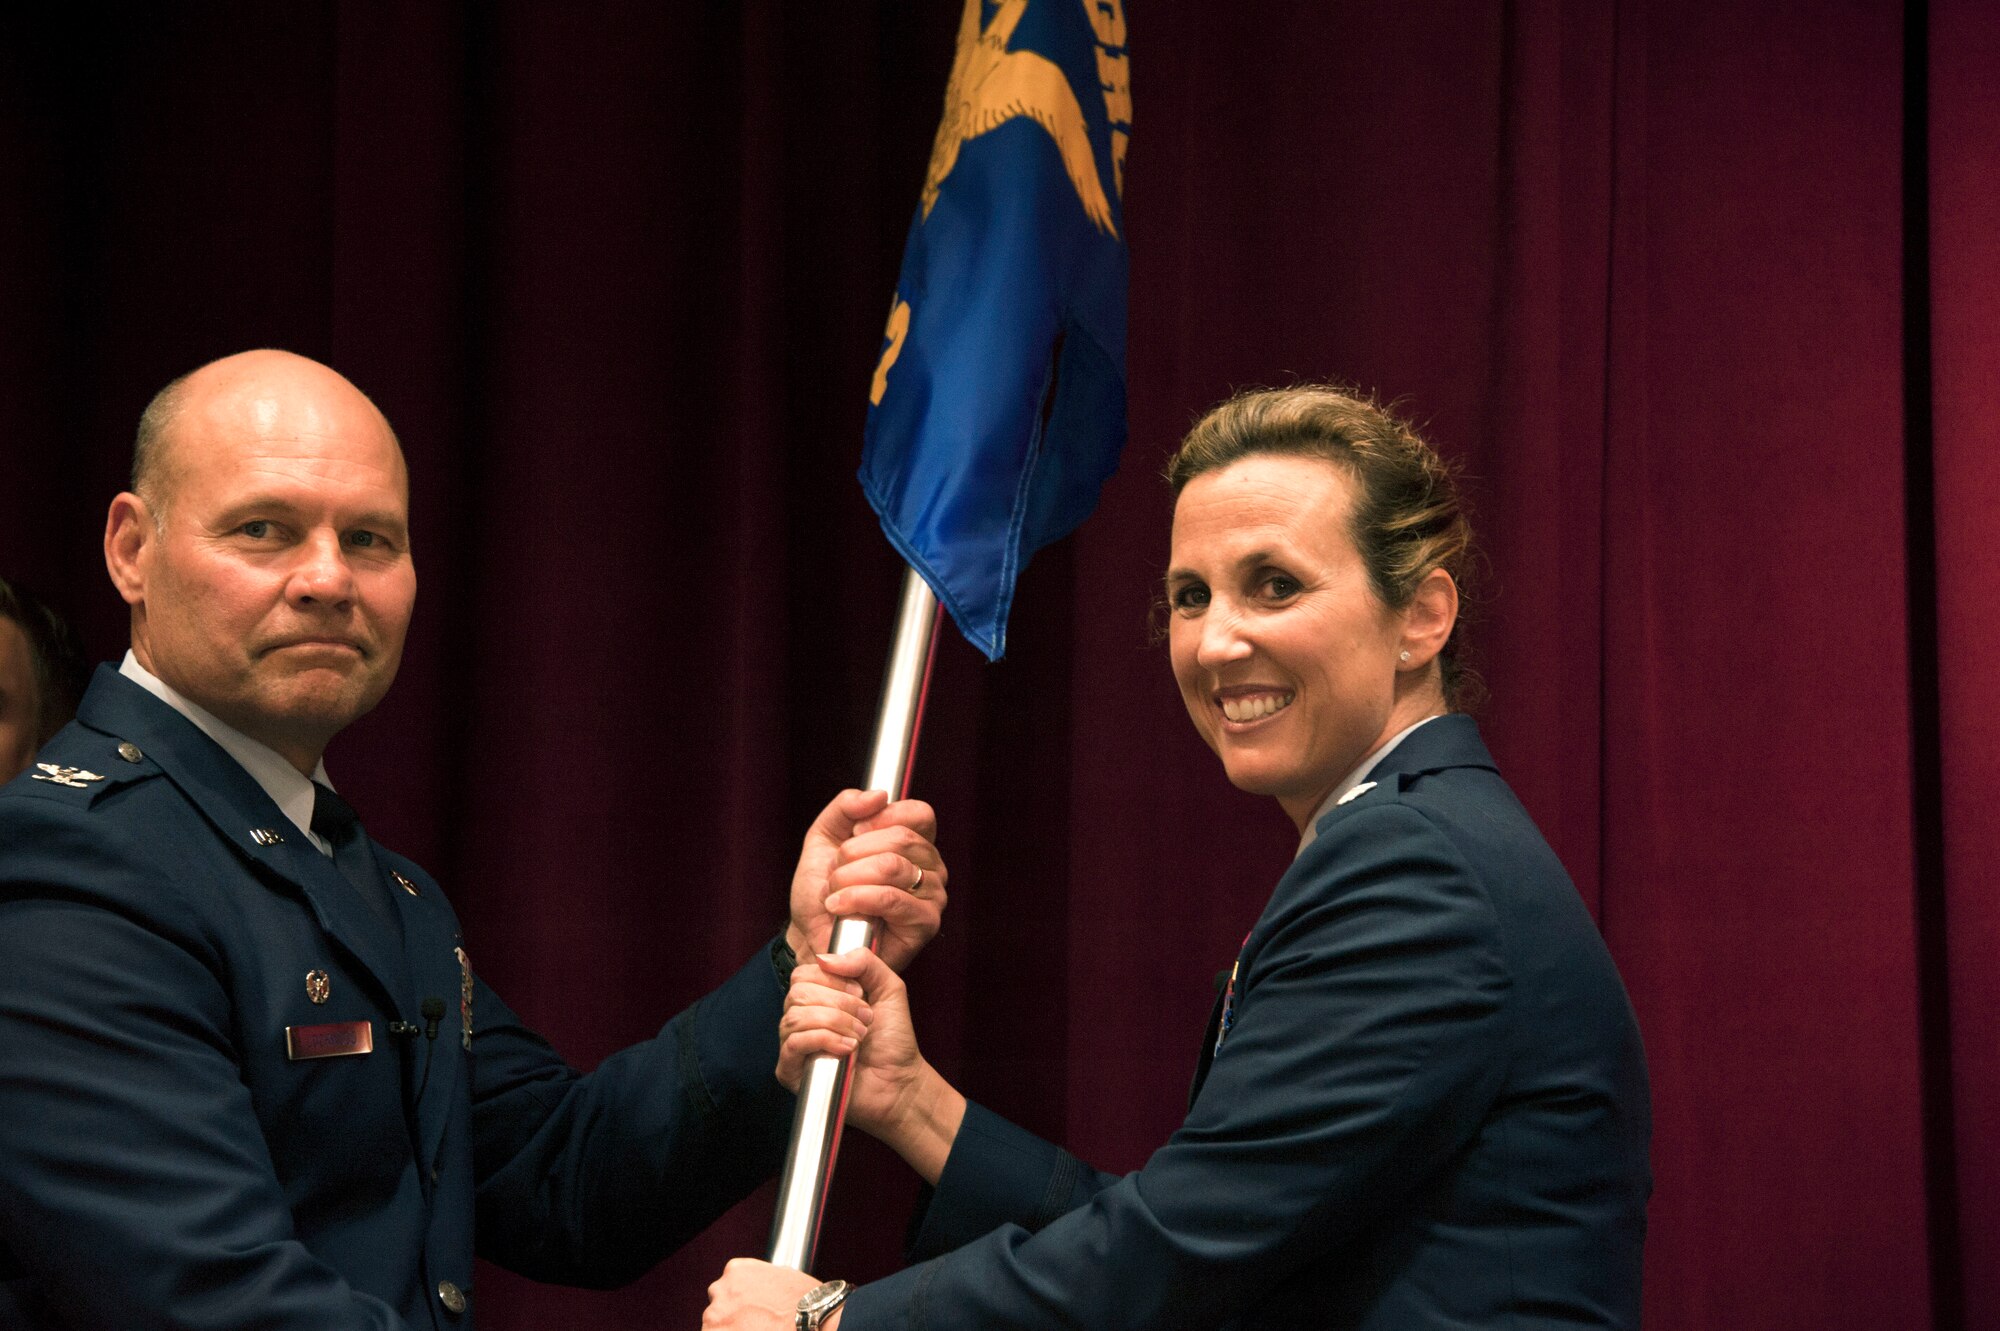 Col. Scott Lockwood, commander, Air Force Officer Training School, transfers command of Detachment 12 to Lt. Col. Loralie Rasmussen during a change of command ceremony July 16, 2015, Maxwell Air Force Base, Alabama. Rasmussen took command of the detachment from her husband, Lt. Col. Reid Rasmussen, who is attending Air War College here. (U.S. Air Force photo by Airman 1st Class Alexa Culbert)